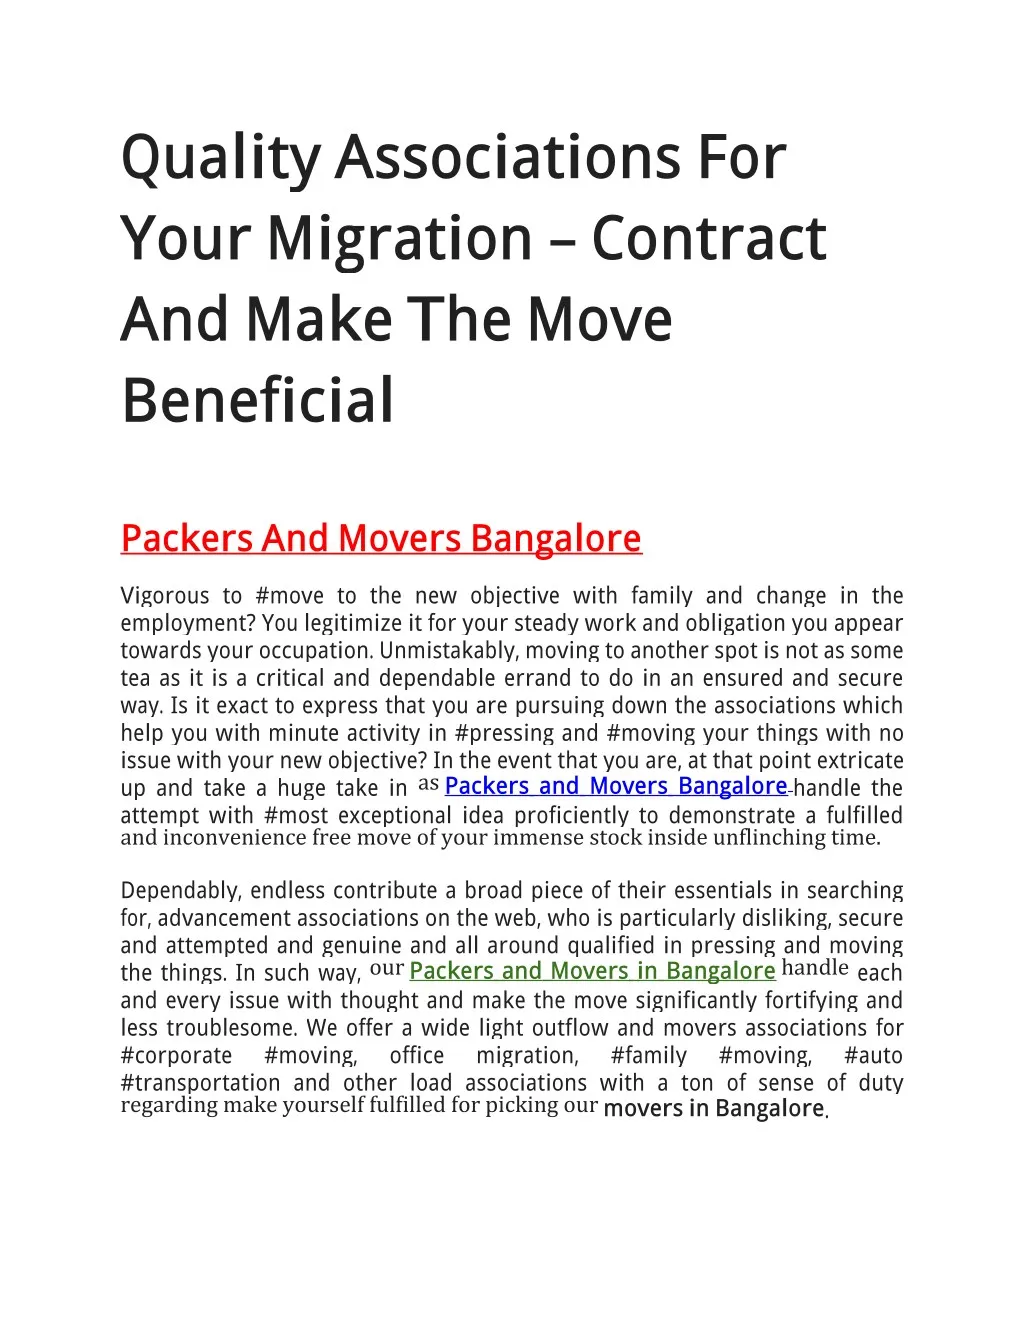 quality associations for your migration contract